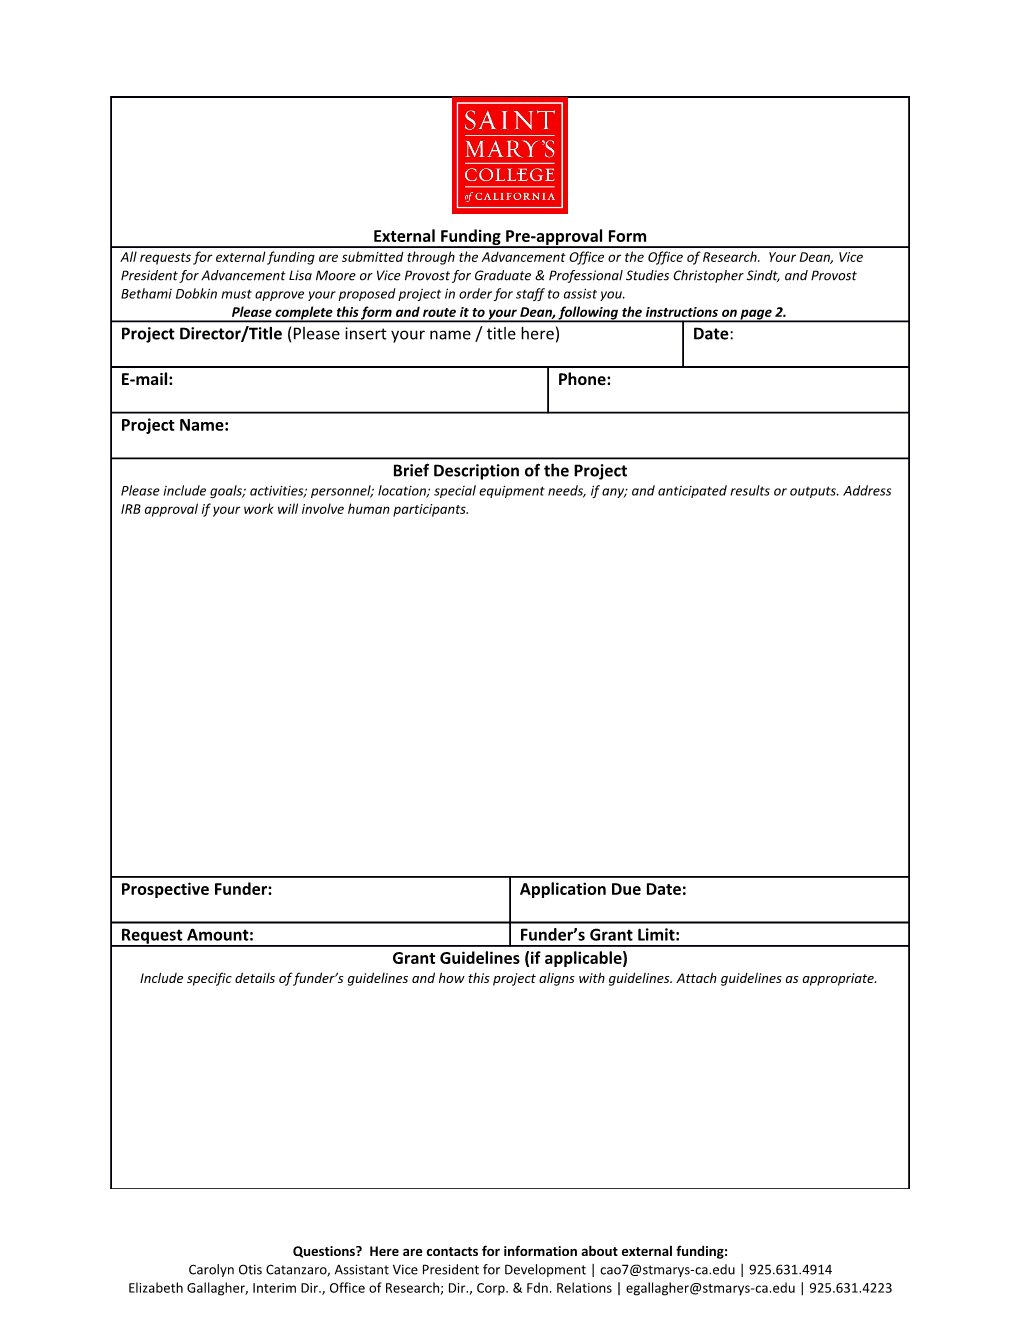 Saint Mary's Grants Pre-Approval Form